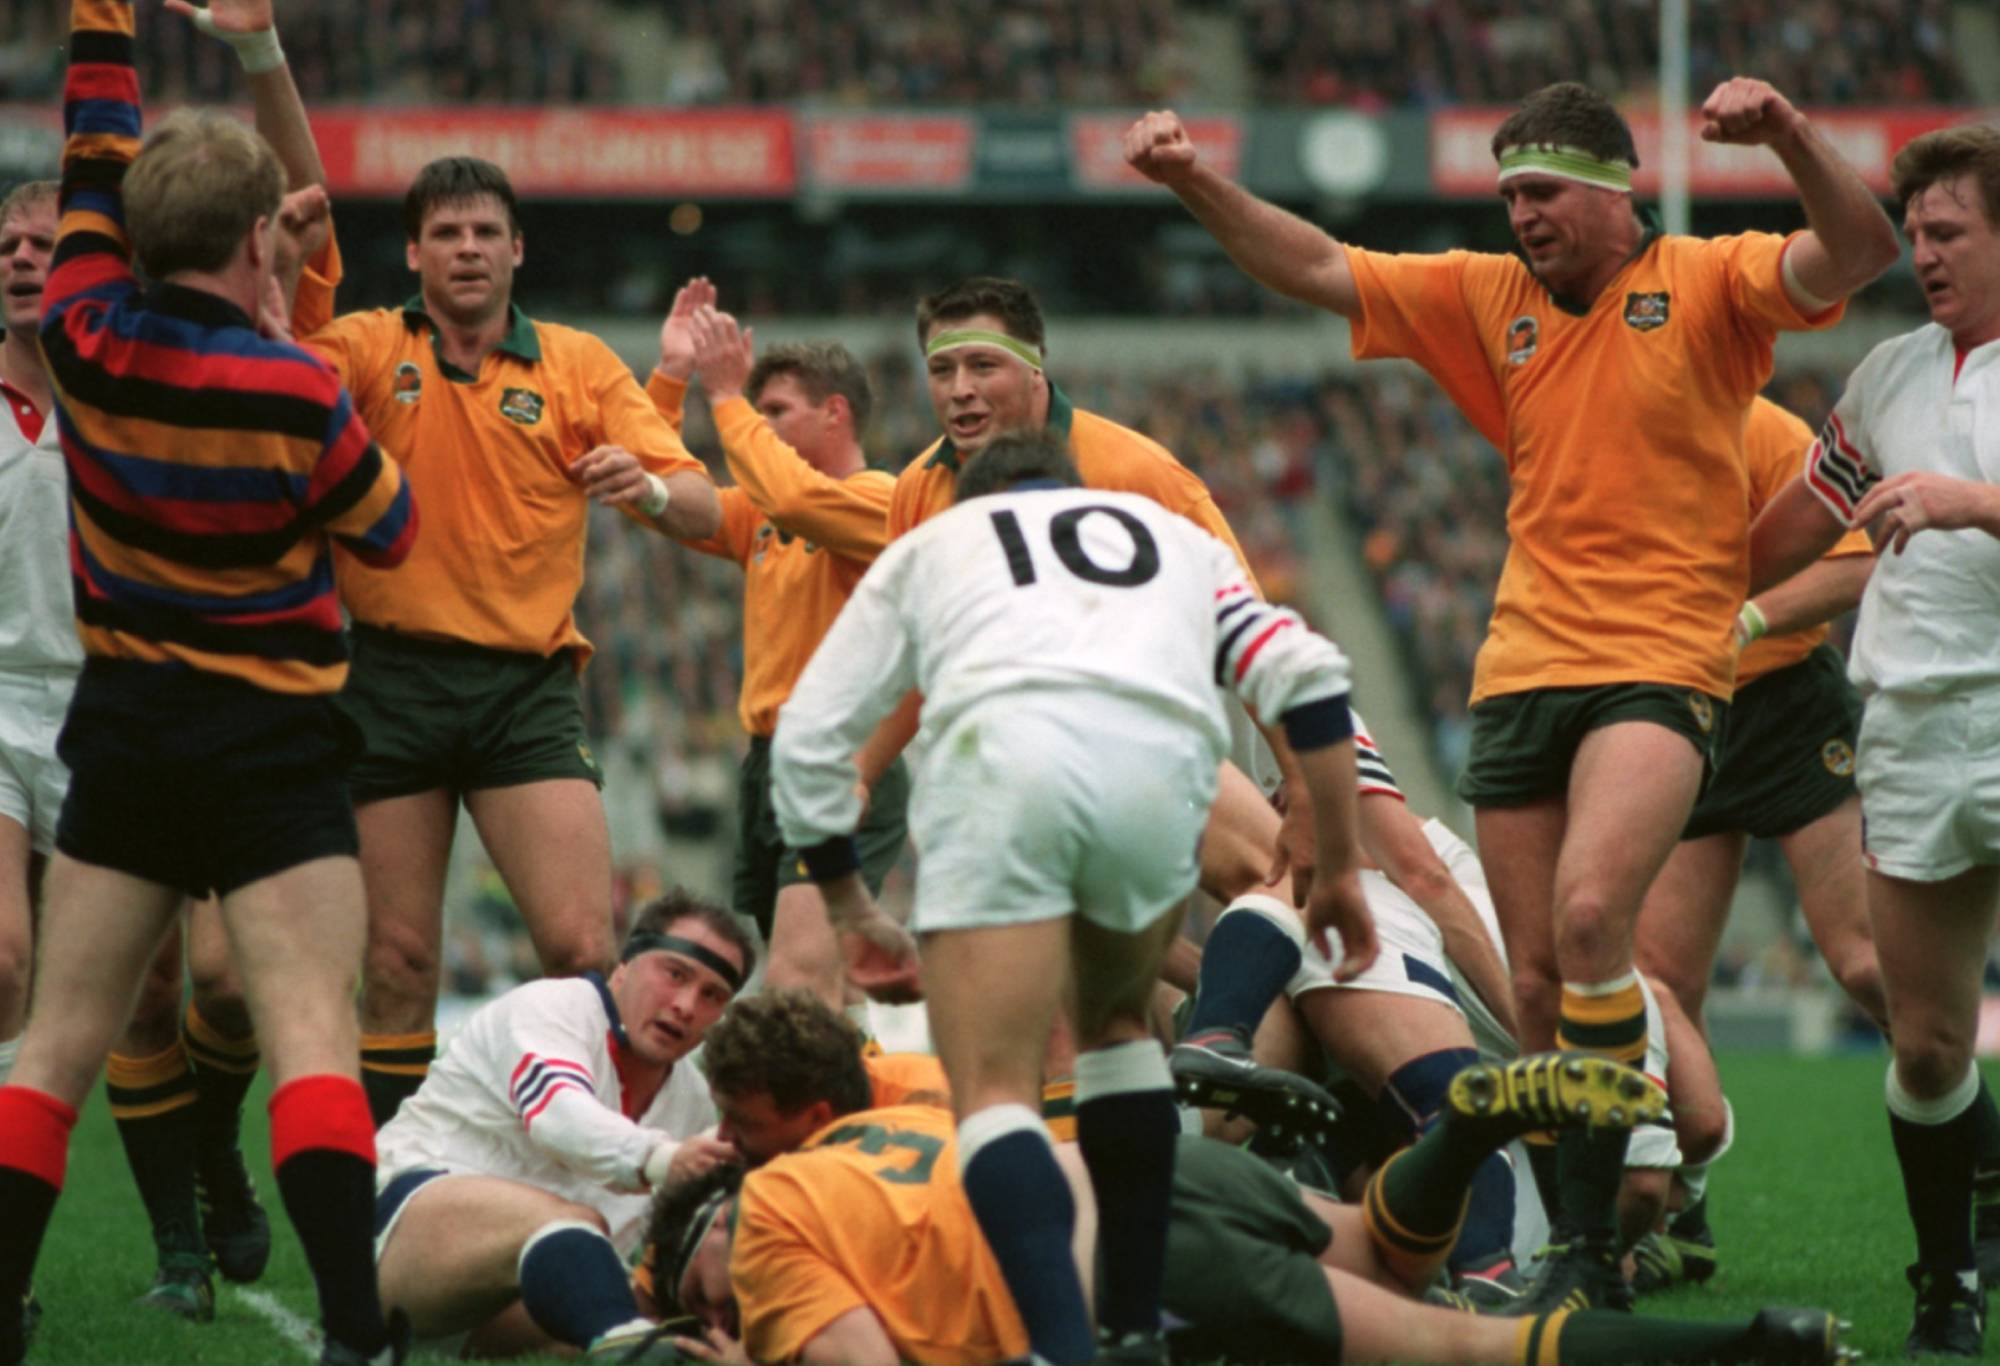 Tony Daly scores a try in the 1991 World Cup final (Photo by Phil O'Brien/EMPICS via Getty Images)